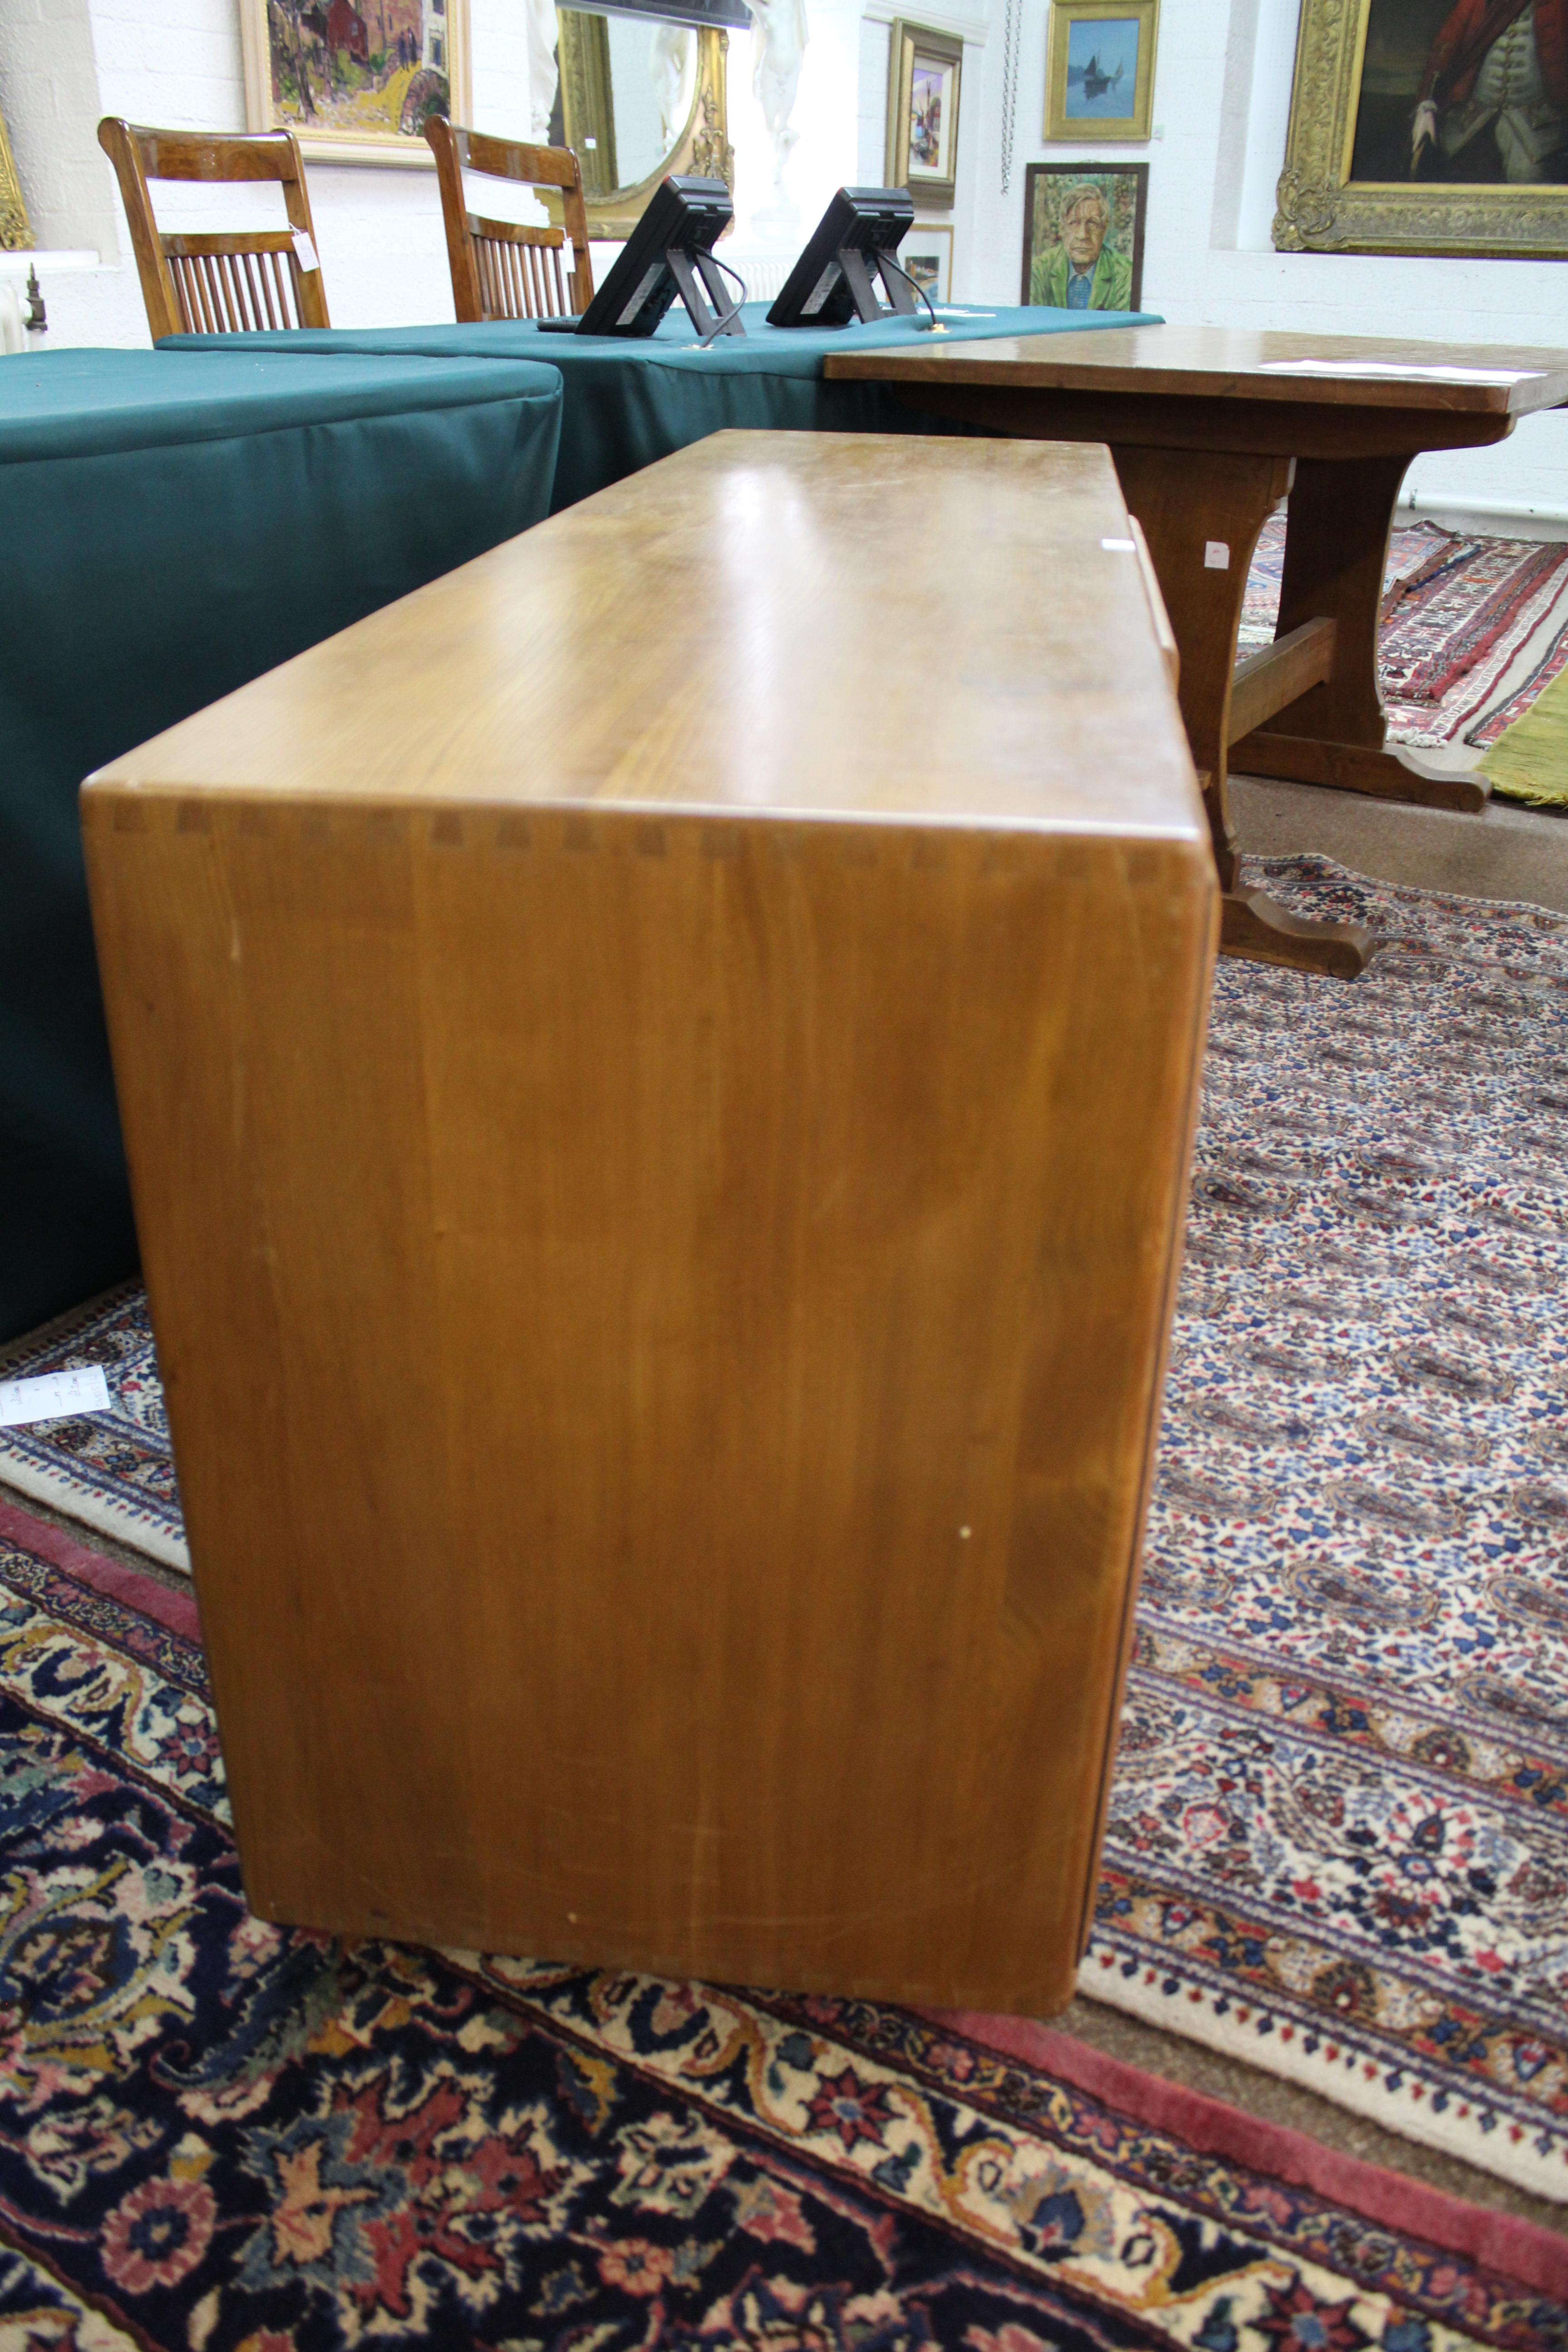 ERCOL SIDEBOARD a large light elm sideboard with 3 central drawers (1 for cutlery) and flanked by - Image 5 of 9